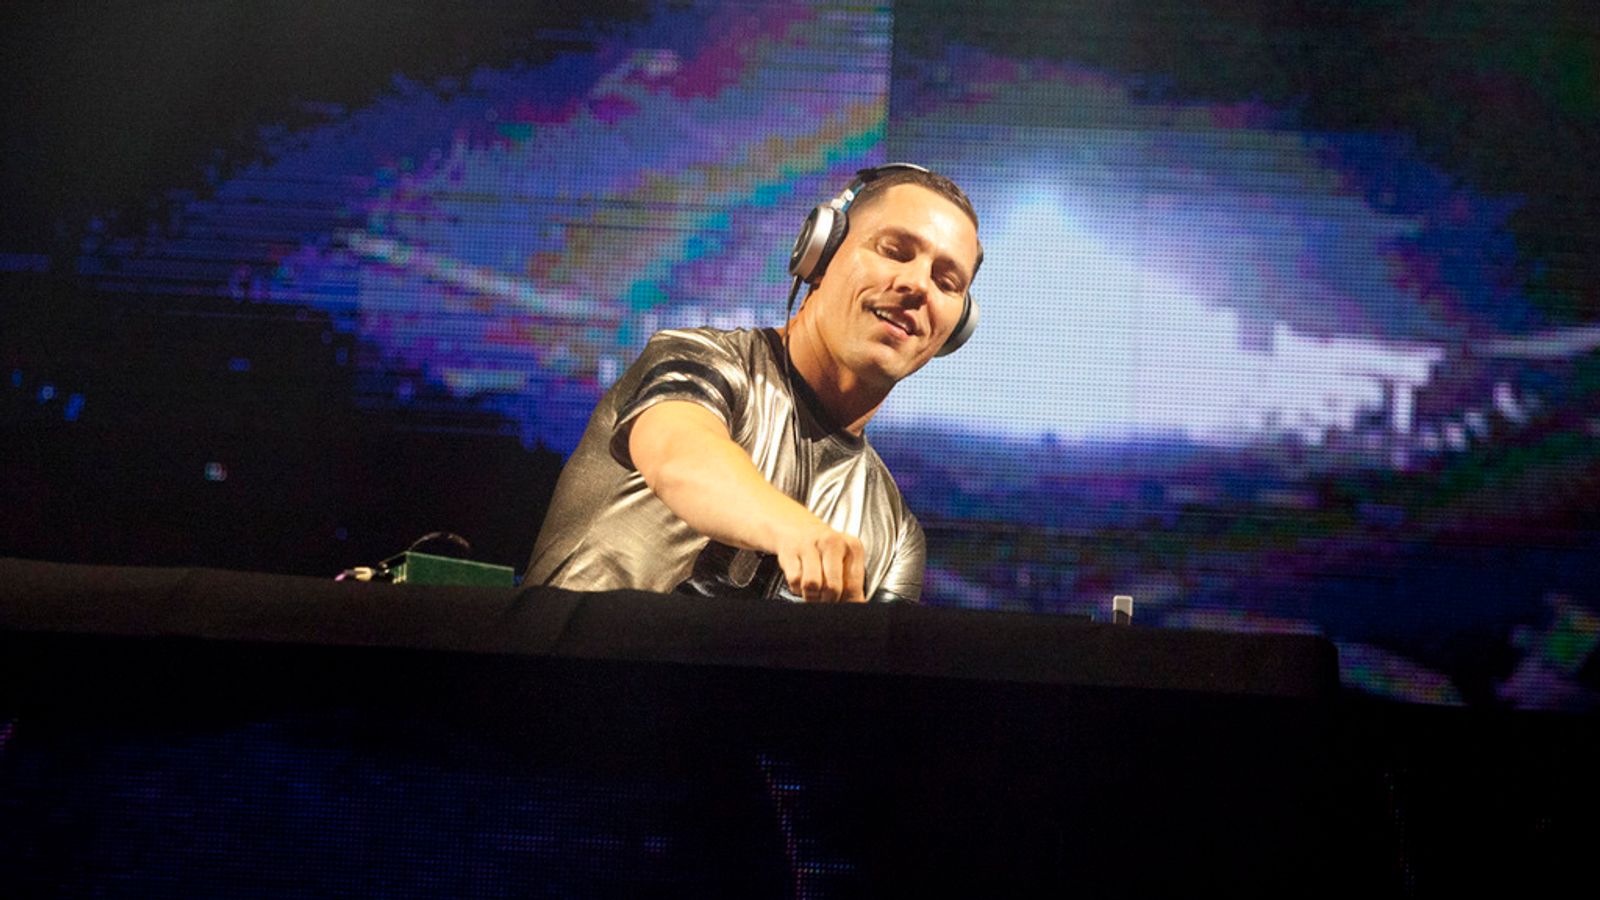 DJ Tiesto pulls out of Super Bowl performance after 'family emergency'